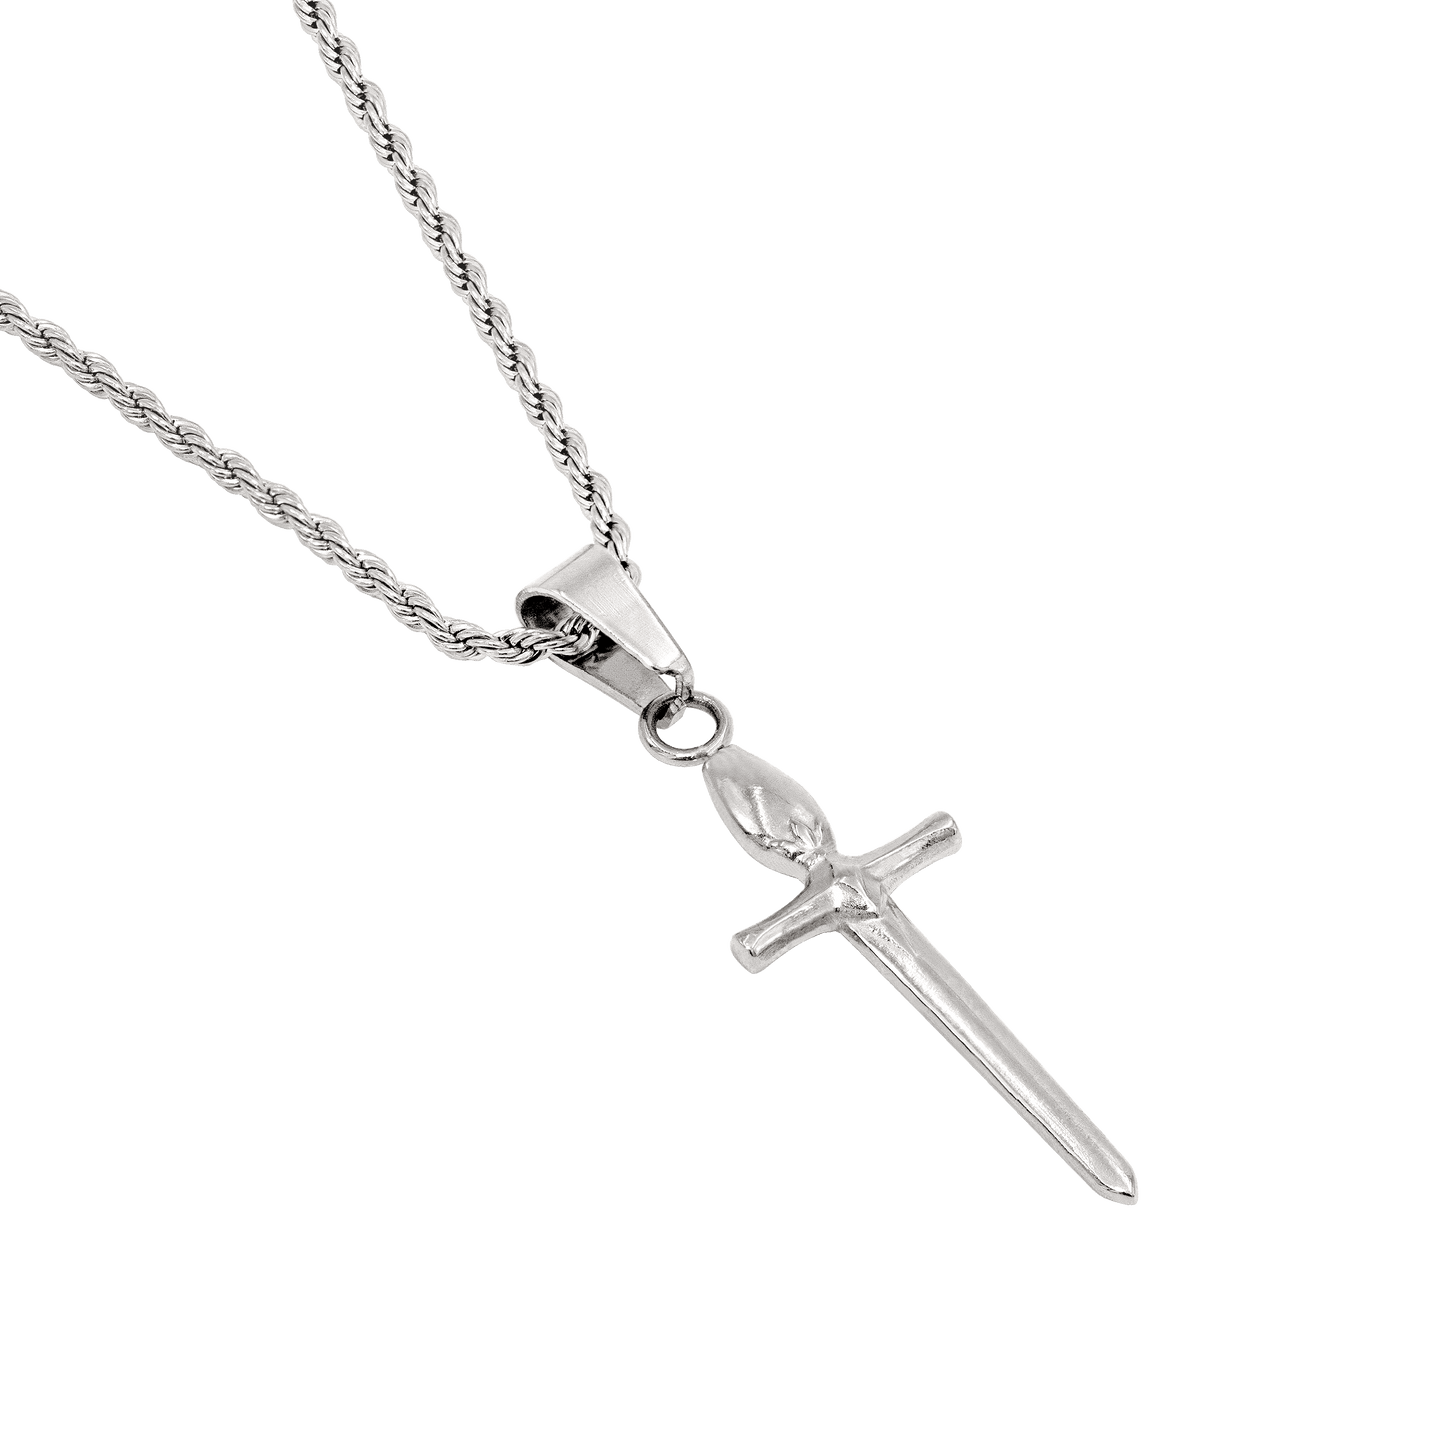 About Liberty Necklace Silver